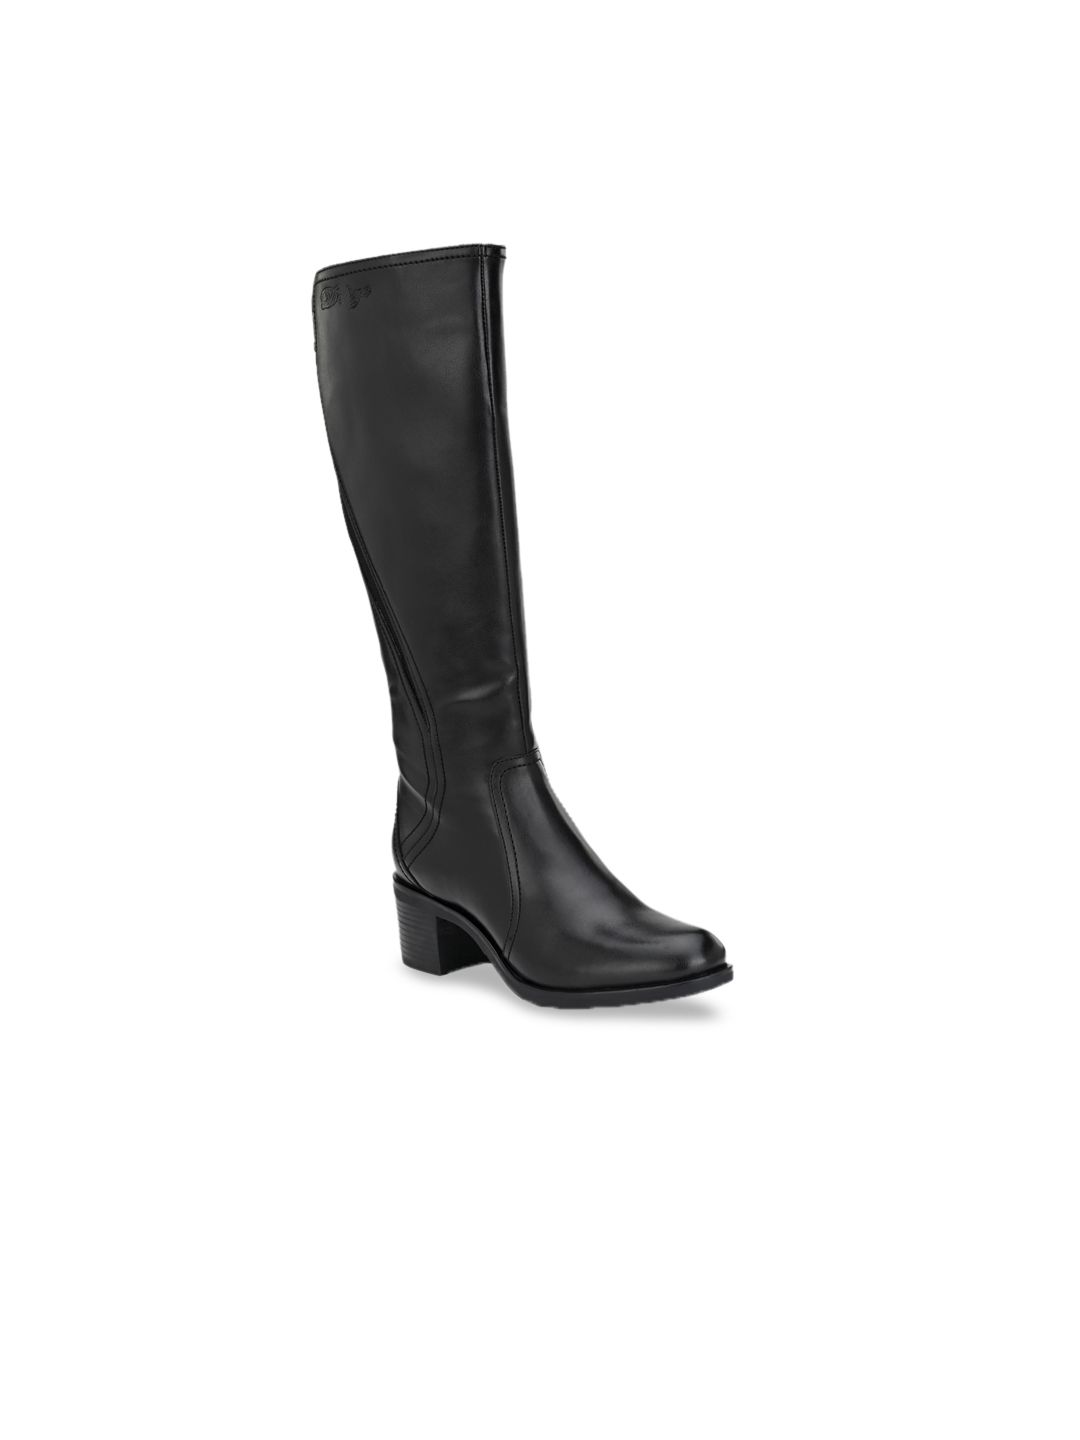 Delize Women Black Solid High-Top Heeled Boots Price in India